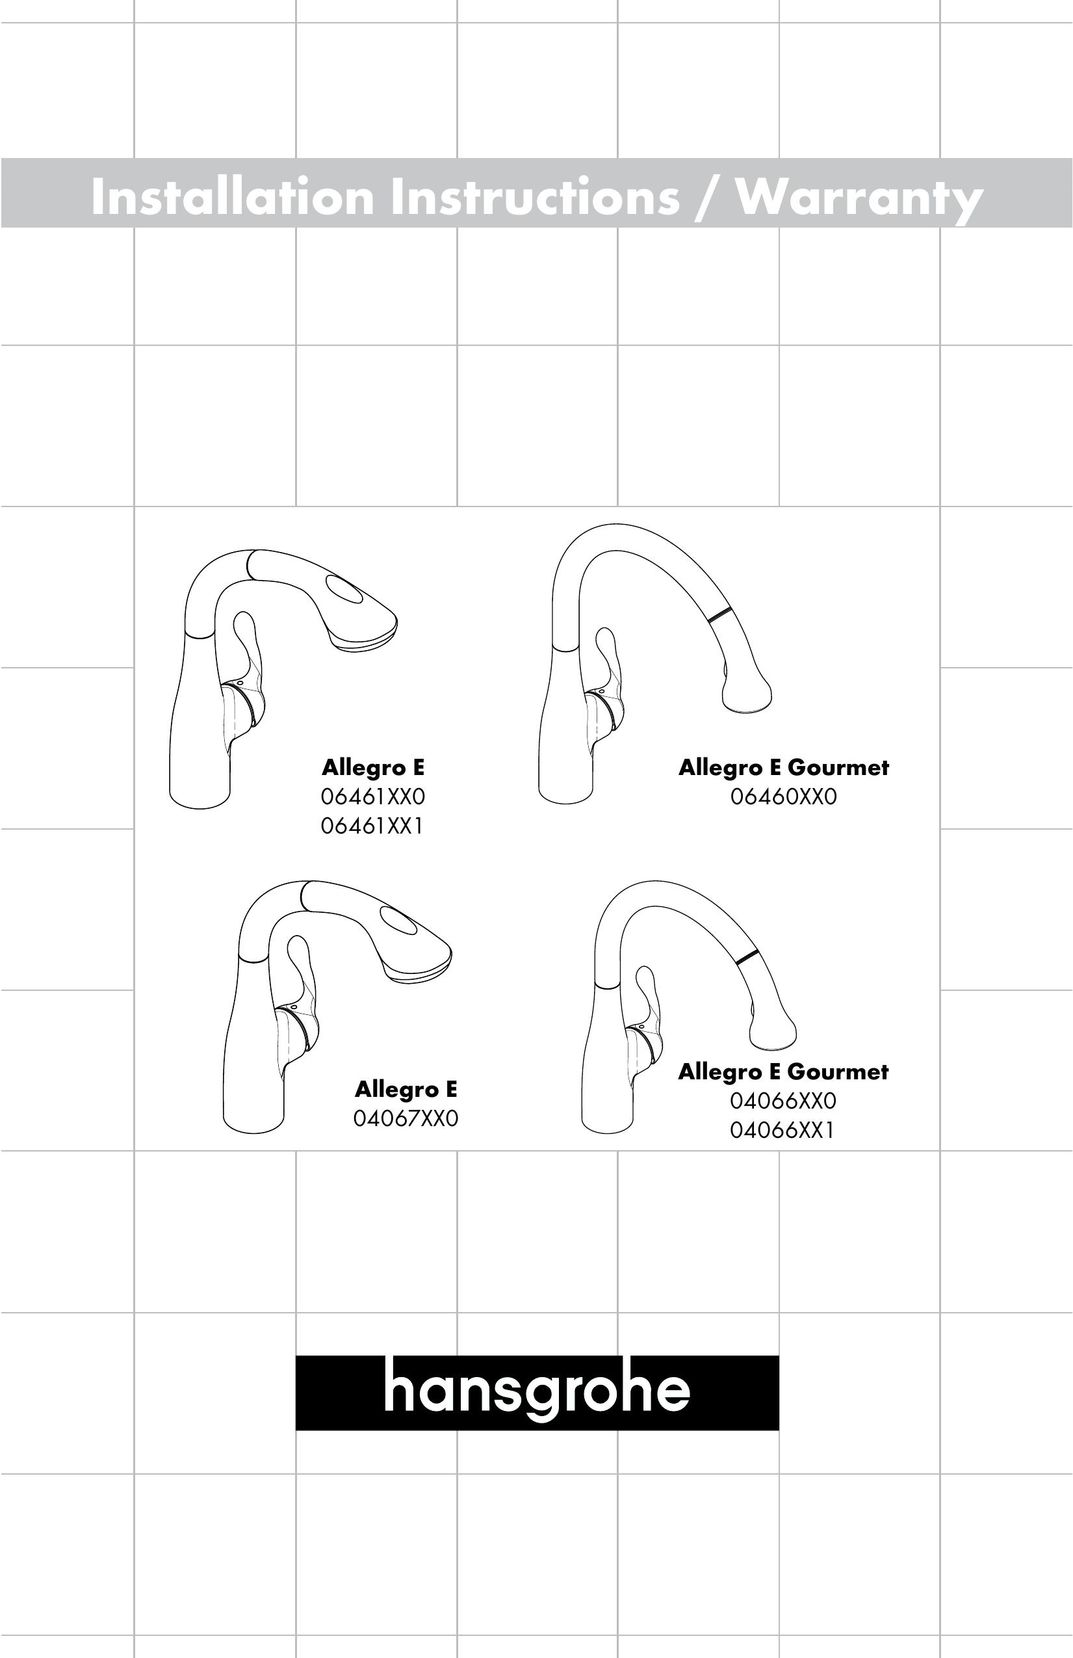 Allegro Industries 04066XX1 Plumbing Product User Manual (Page 1)